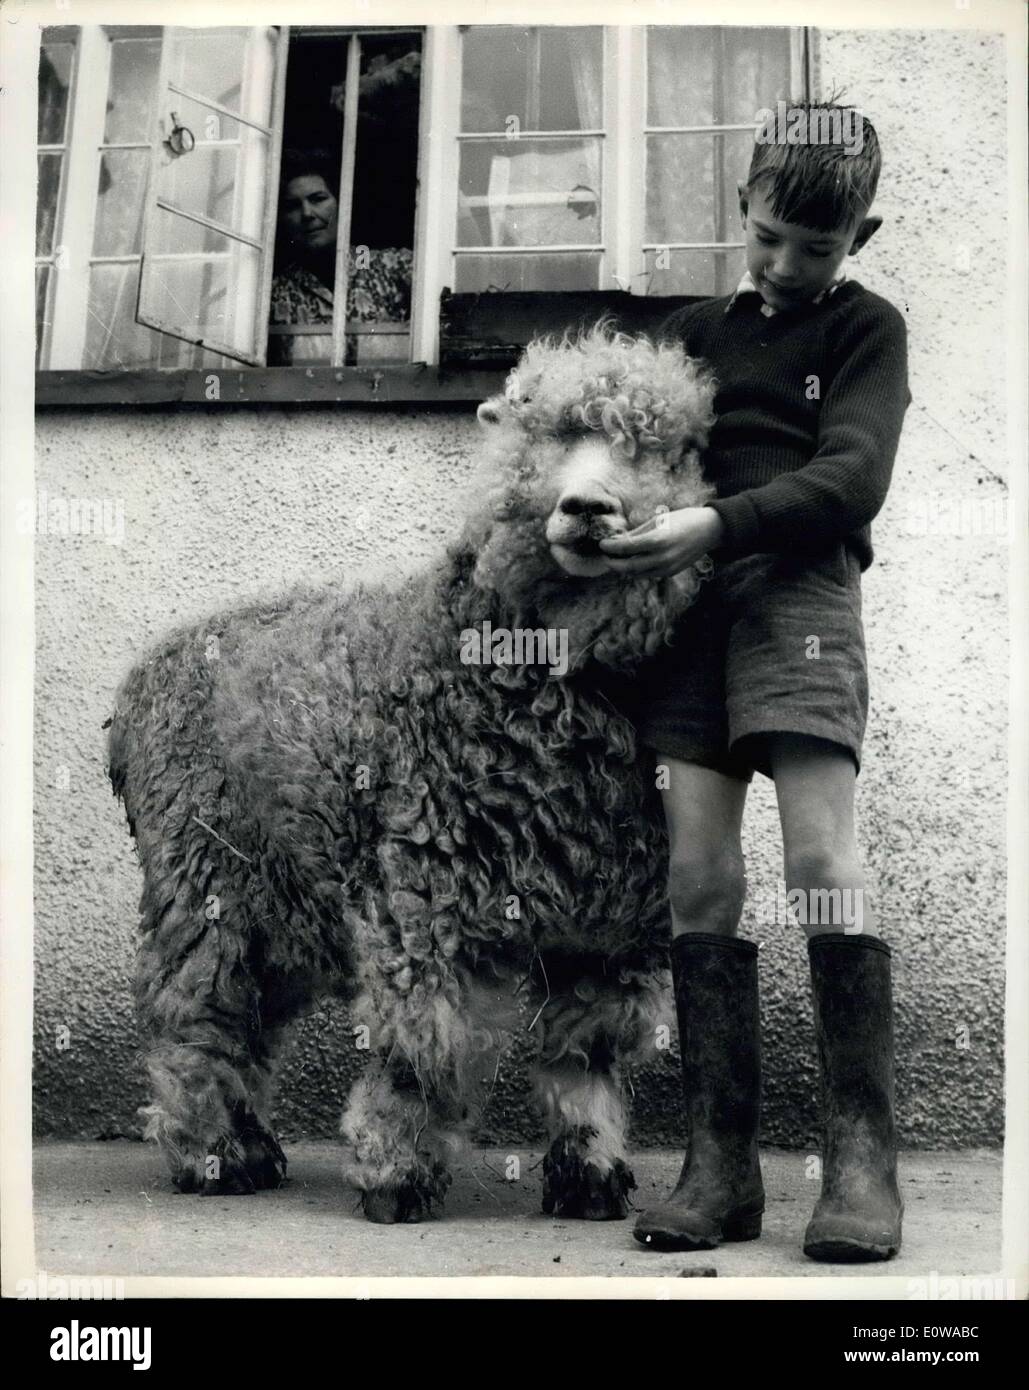 Mar. 15, 1962 - 15-3-62 Heavyweight champion of the Sheep Stakes. Heavyweight champion of Great Britain in the sheep stakes ,that is, is 1-year old, 17-stone ewe who is the pride and joy of the Payne family who have a farm at Ashcombe, Devon. This sheep is a family pet and prefers licorice all sorts and baked potatoes to plain grass. Photo Shows: Wild and wooly, keeping her strength up with a tidbit of licorice give her by Ian Payne. Stock Photo